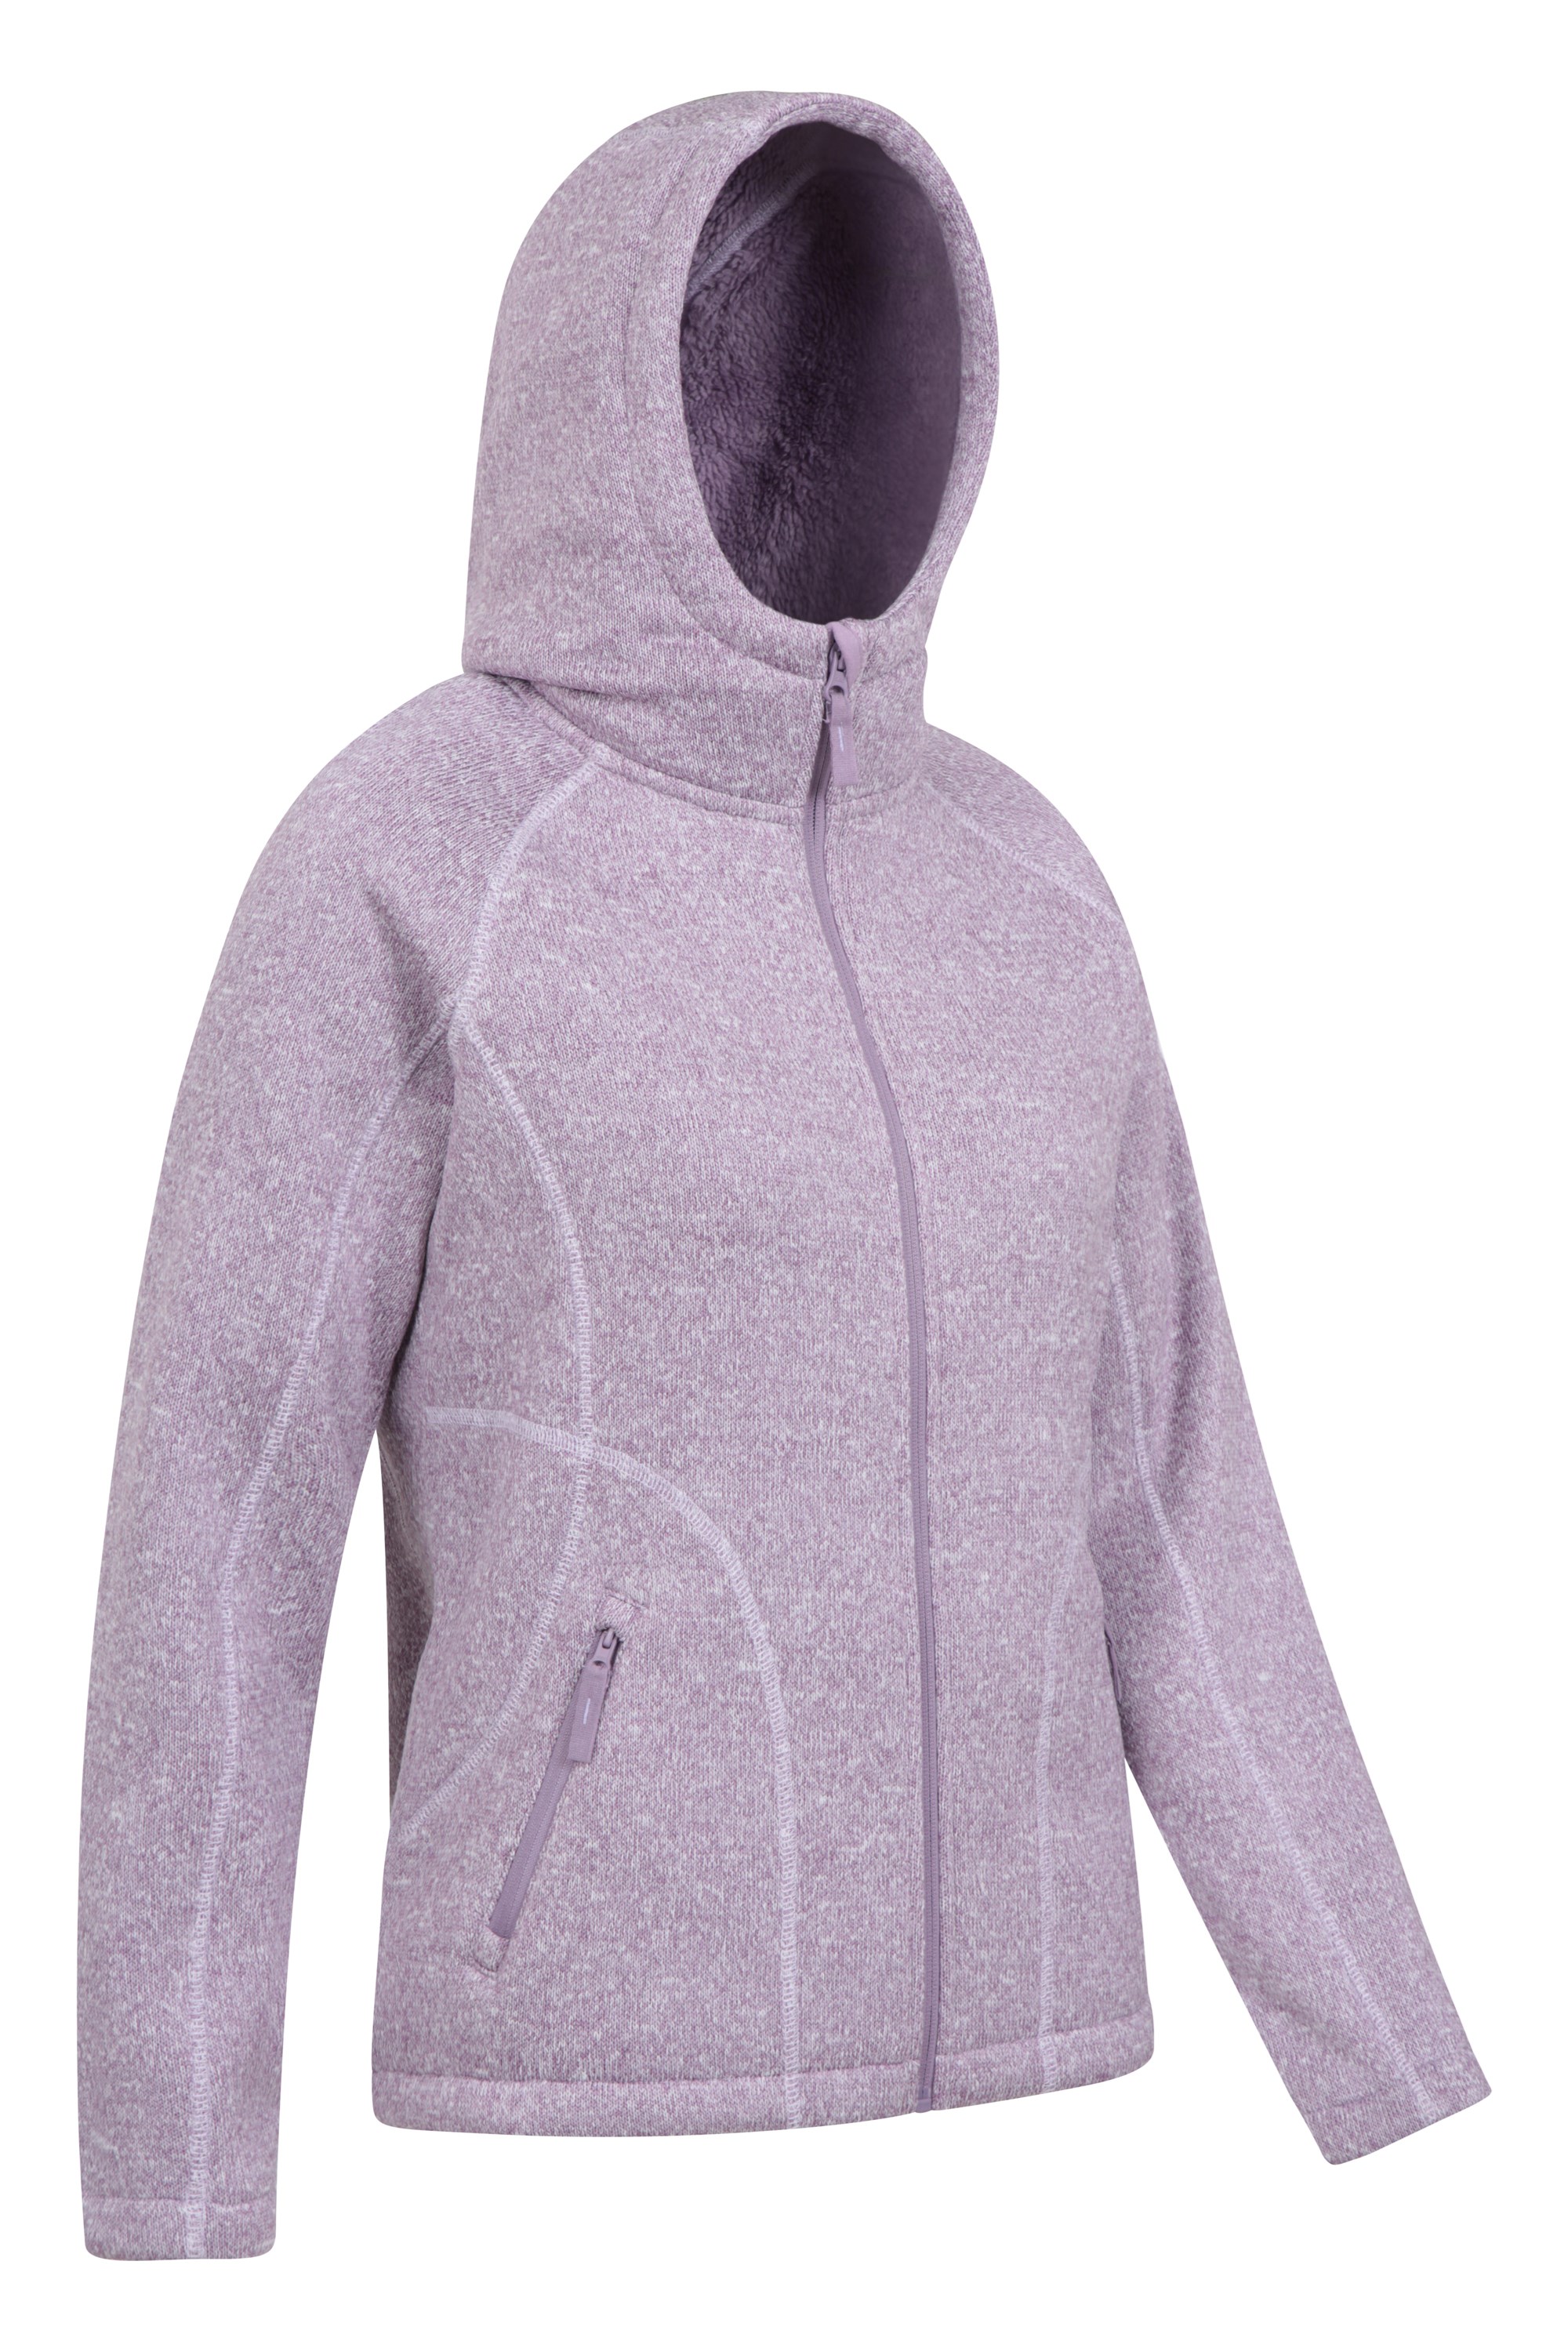 Mountain Warehouse Voyage Womens Full Zip Hoodie Hiking & Daily Use Warm & Cosy Pullover Sherpa Lined Ladies Sweatshirt Ideal Jumper for Travelling 